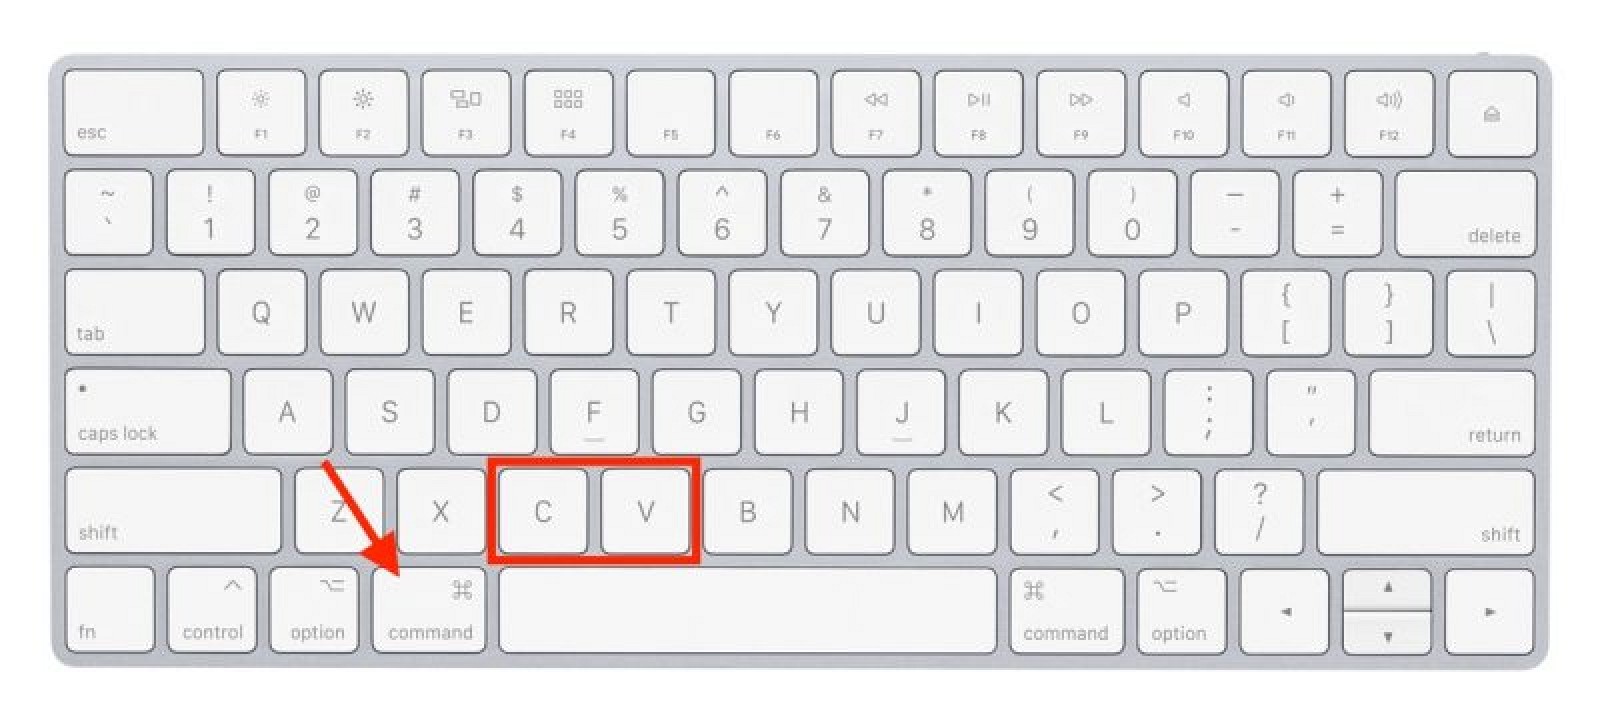 How to Copy and Paste on a Mac MacRumors